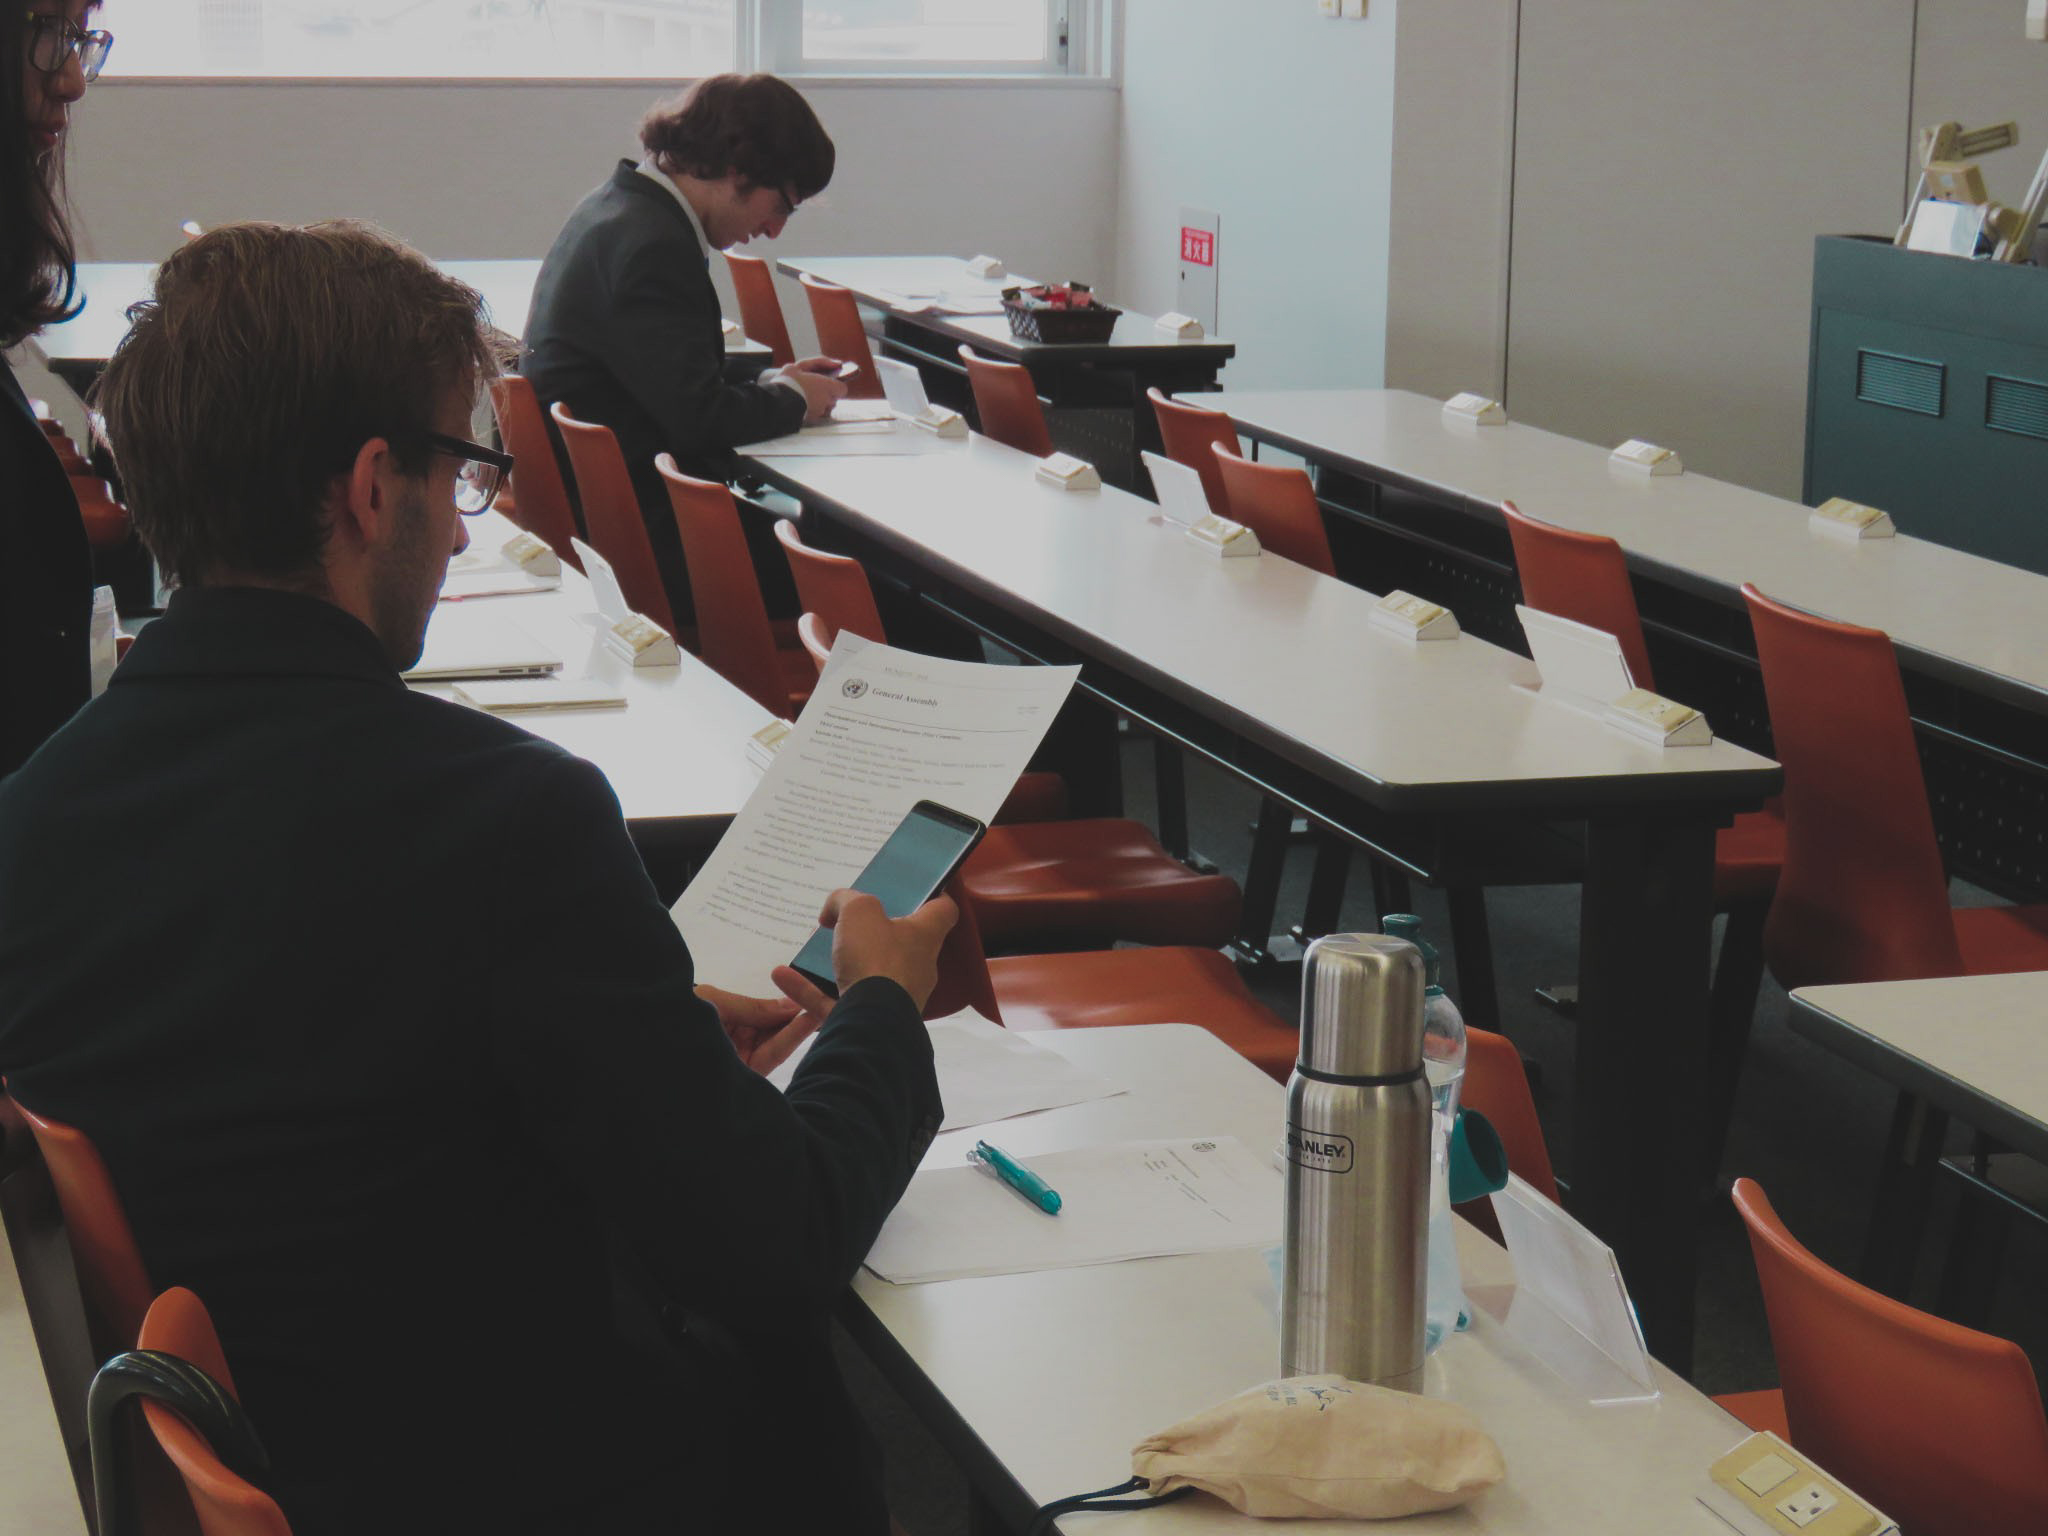  Arriving early at the venue, the delegate of Germany goes over his documents before Day 2 begins. 